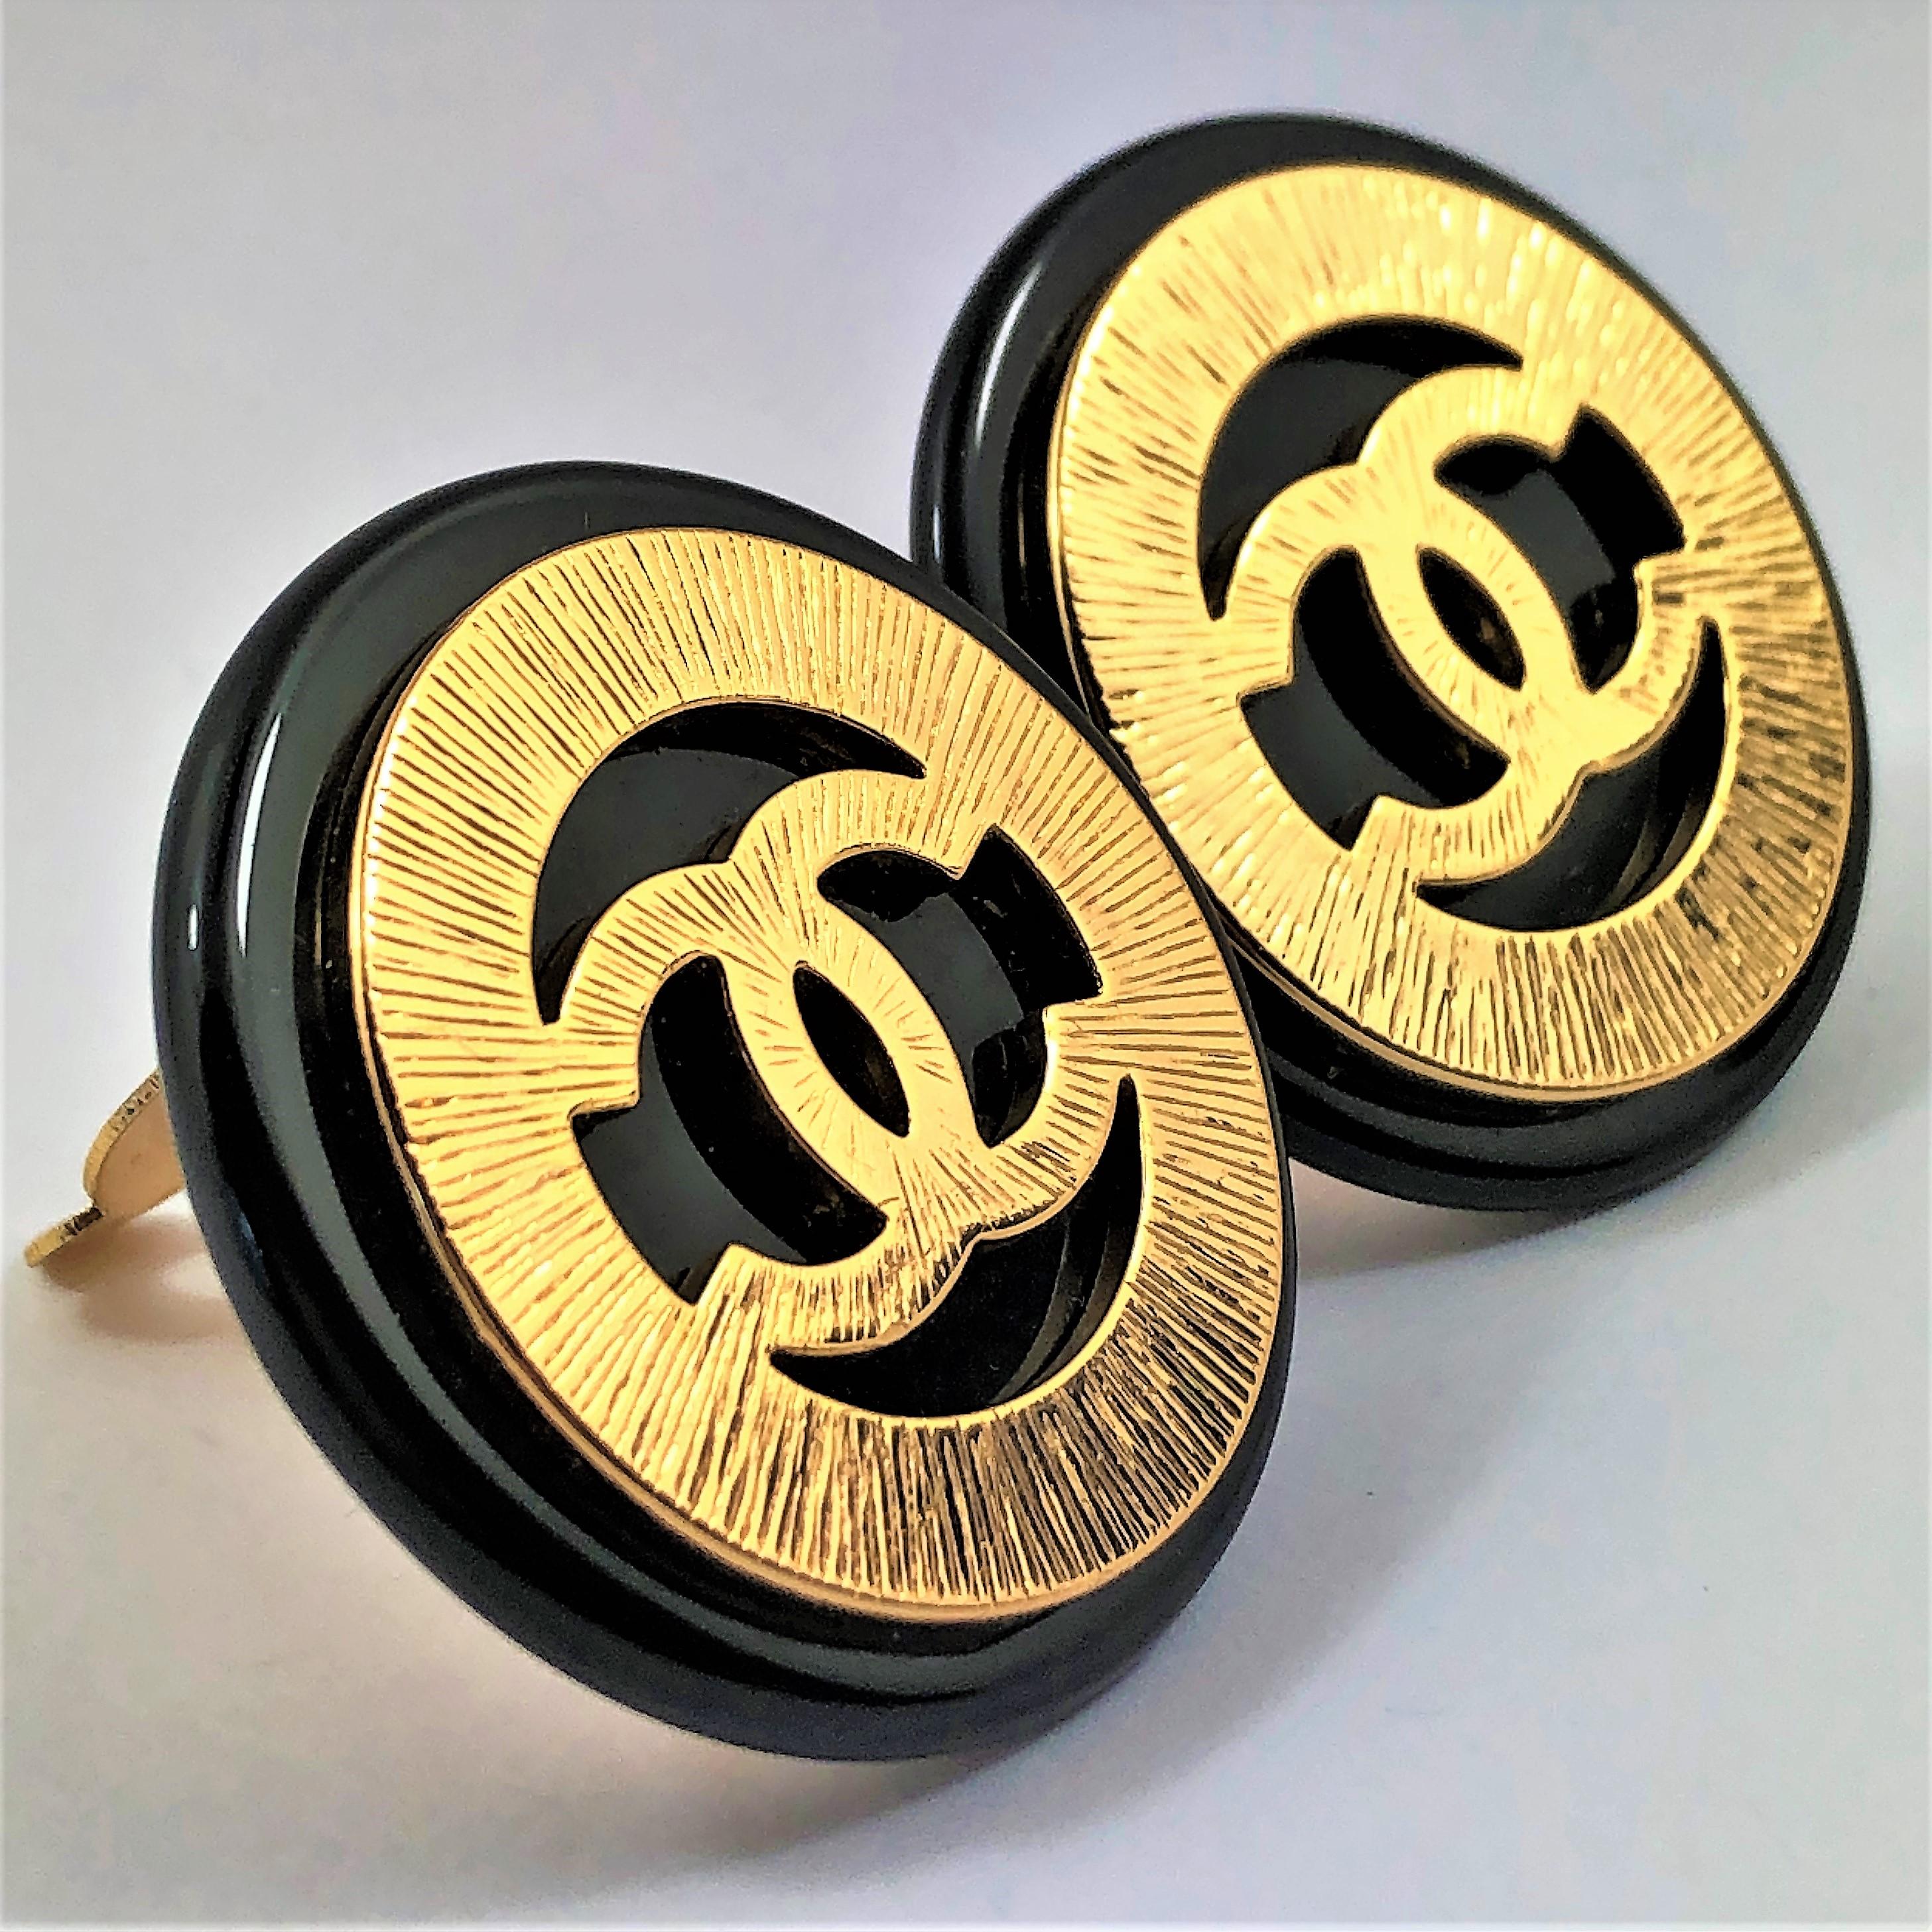 Simple, yet elegant, these vintage black resin Chanel earrings are accented with 
bark finish gold tone metal surrounding the oversized CC logo in the center. Measuring
1.5 inch diameter, these lovely classic earrings are in like new condition. Clip